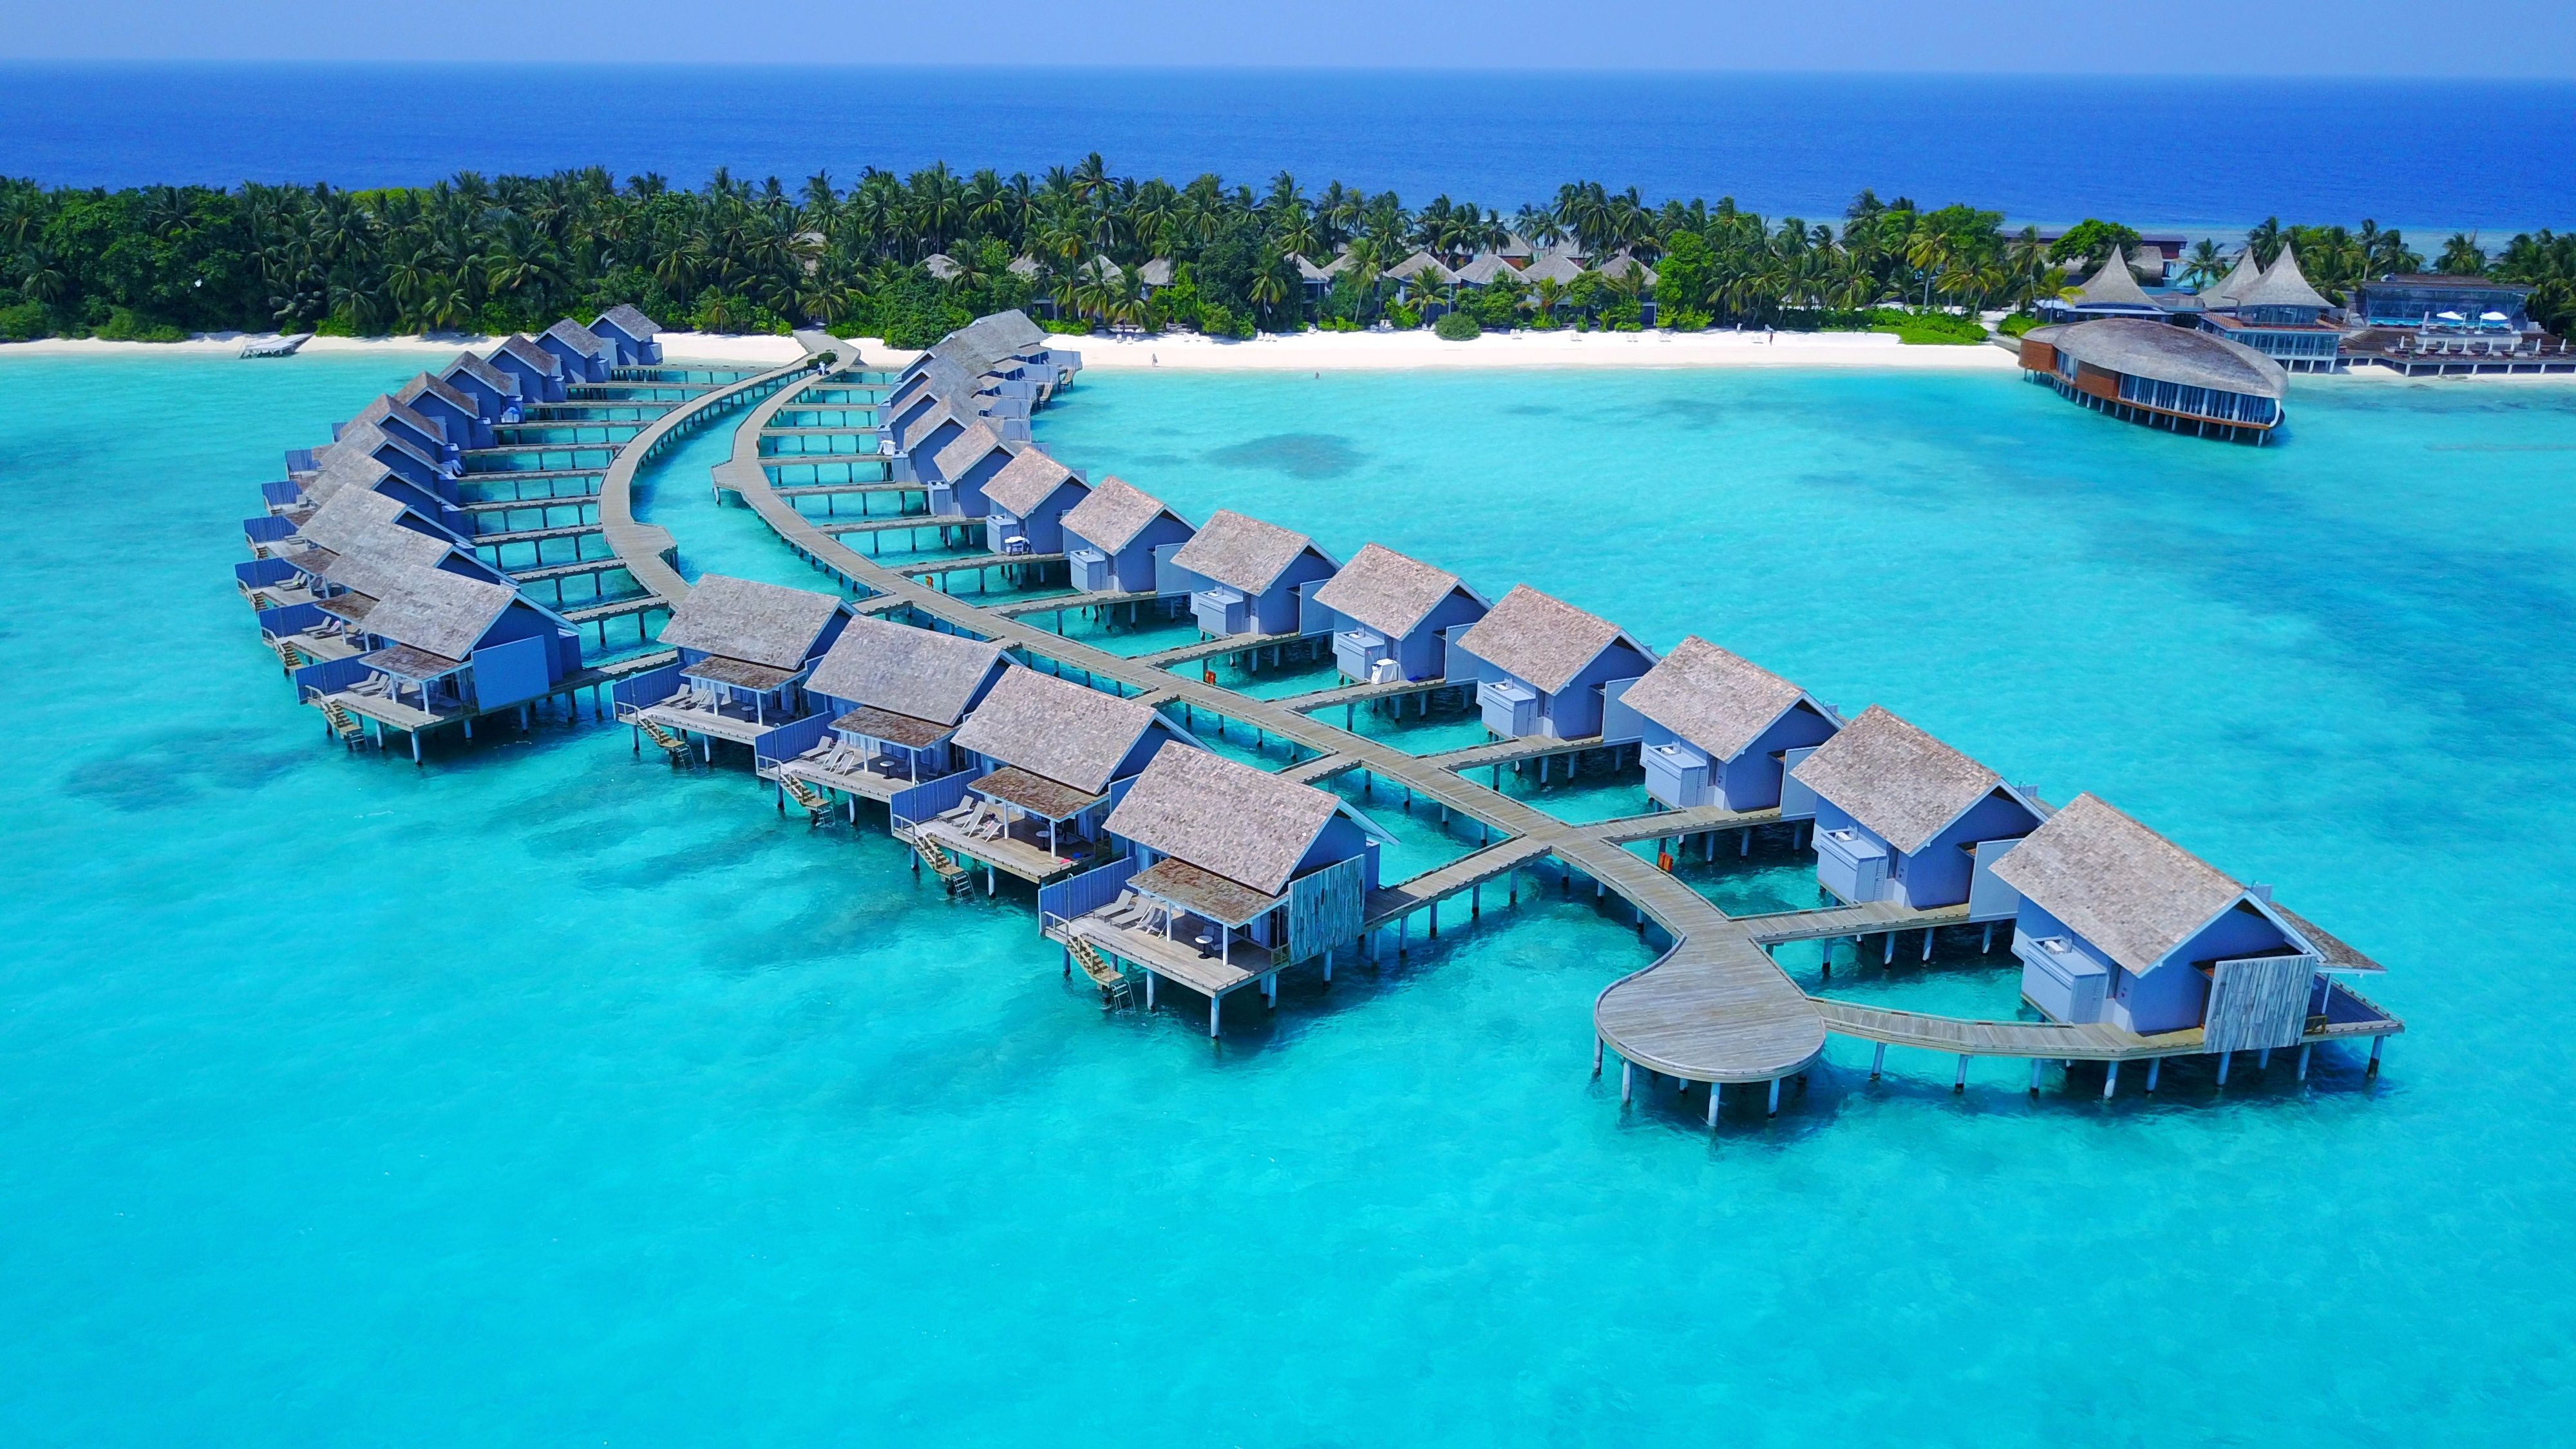 Aerial drone view of luxury water bungalow resort in the maldives. 